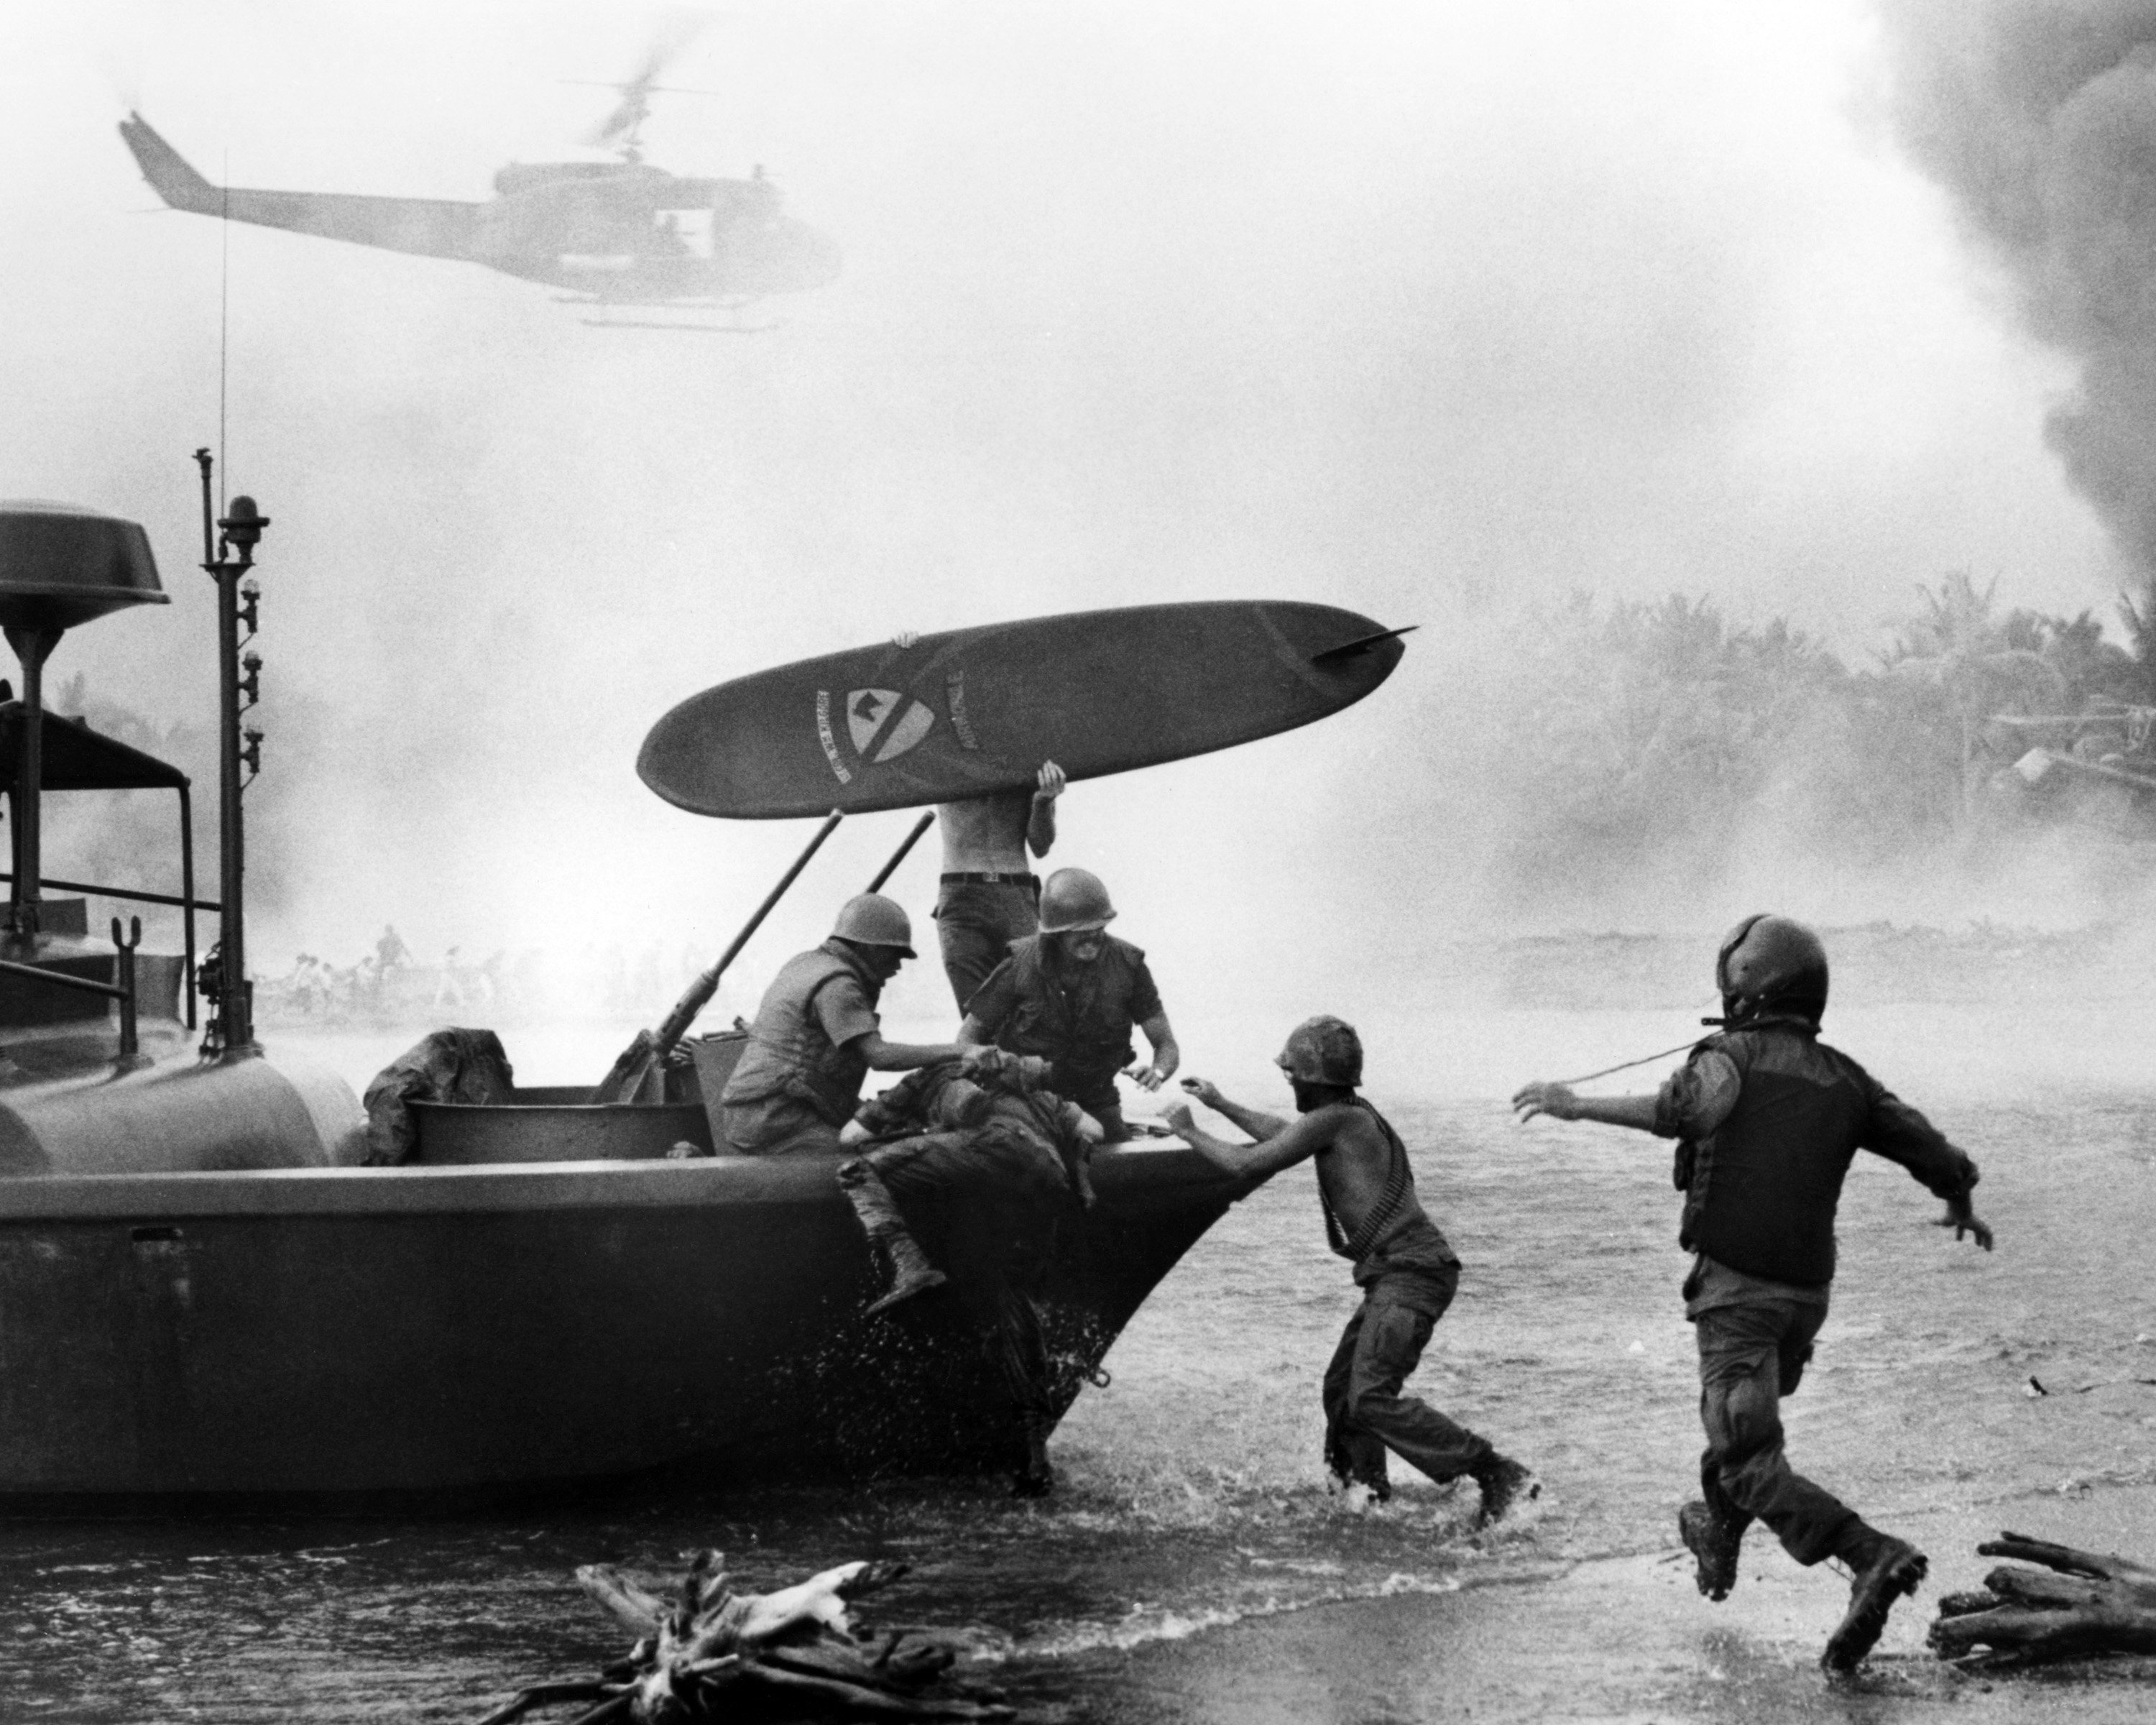 A scene from the film "Apocalypse Now," set during the Vietnam War on January 1, 1979.┃Source: Getty Images